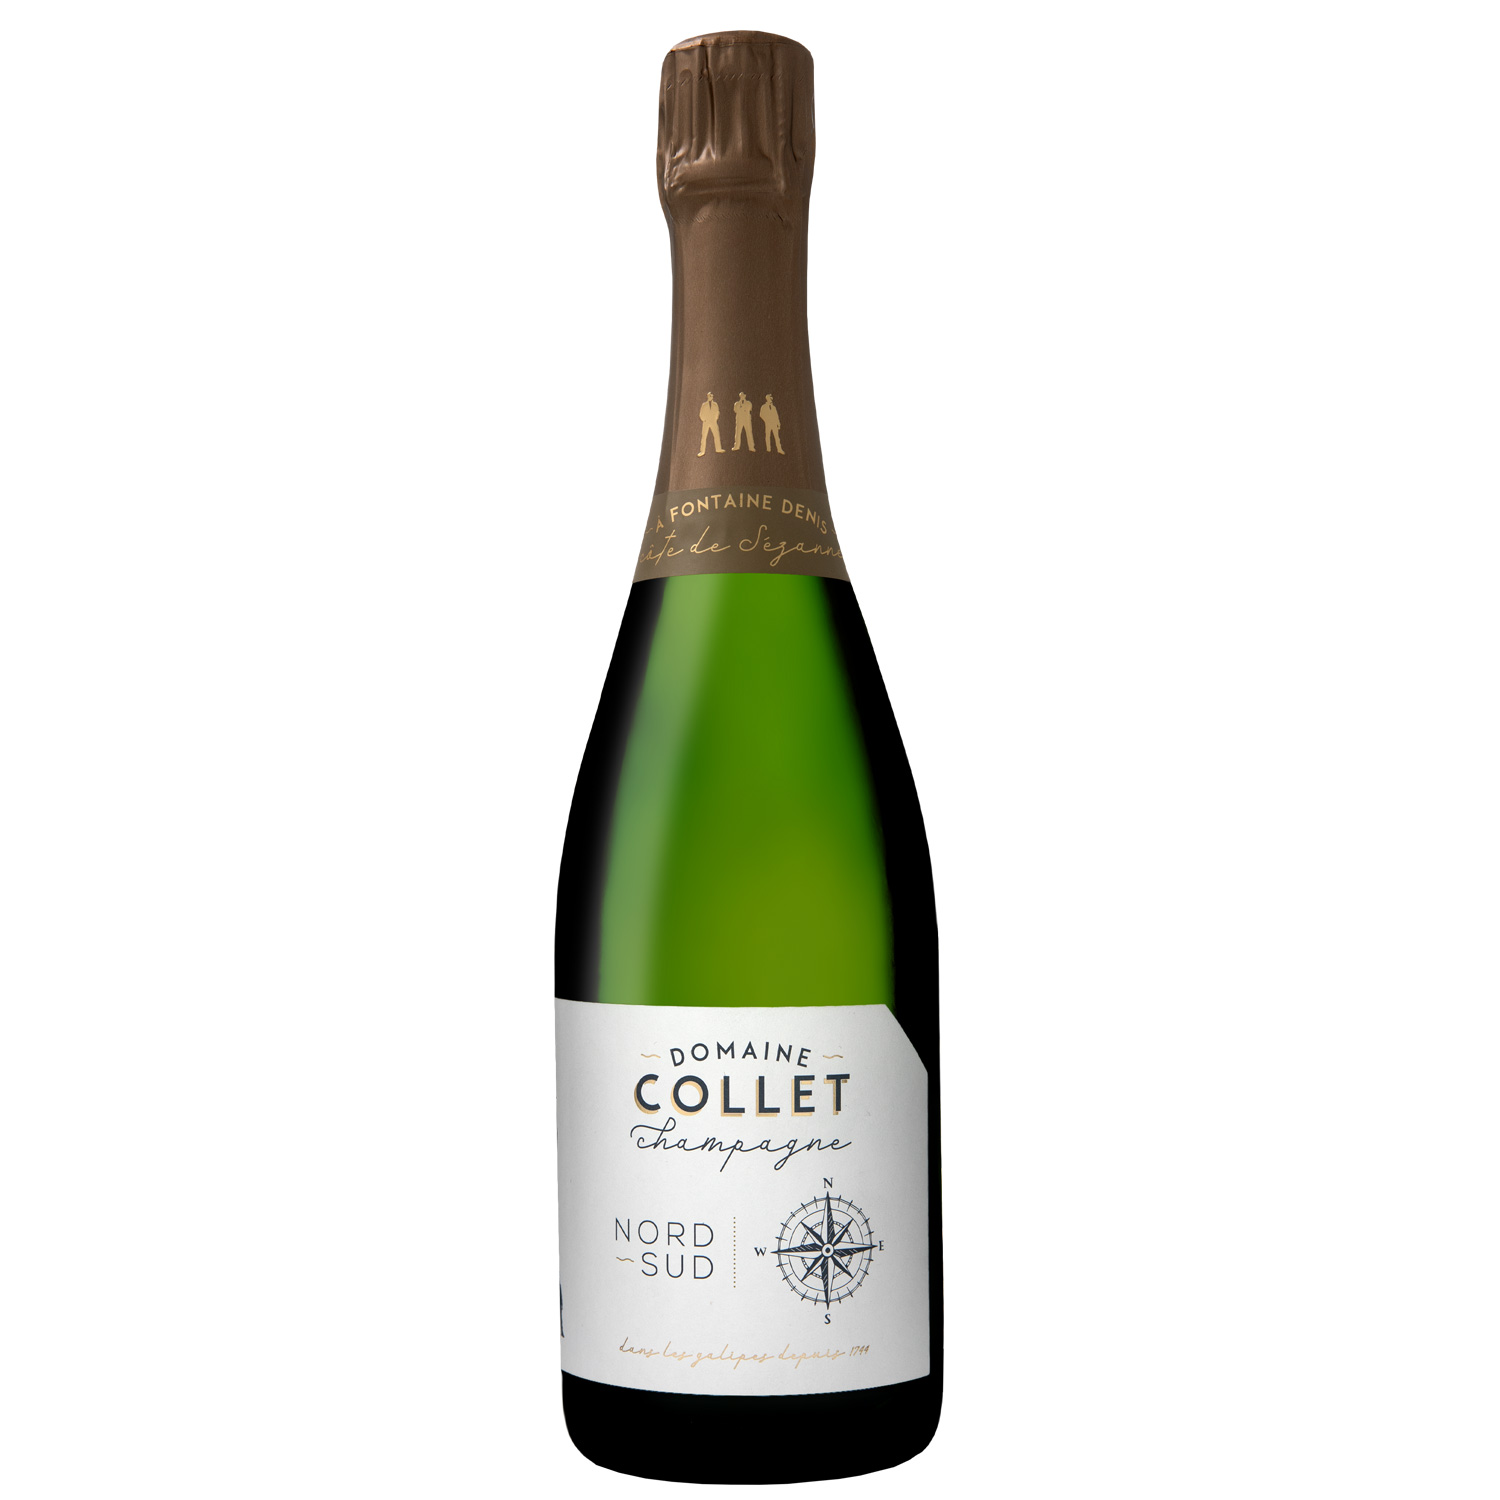 Domaine Collet Champagne Nord Sud